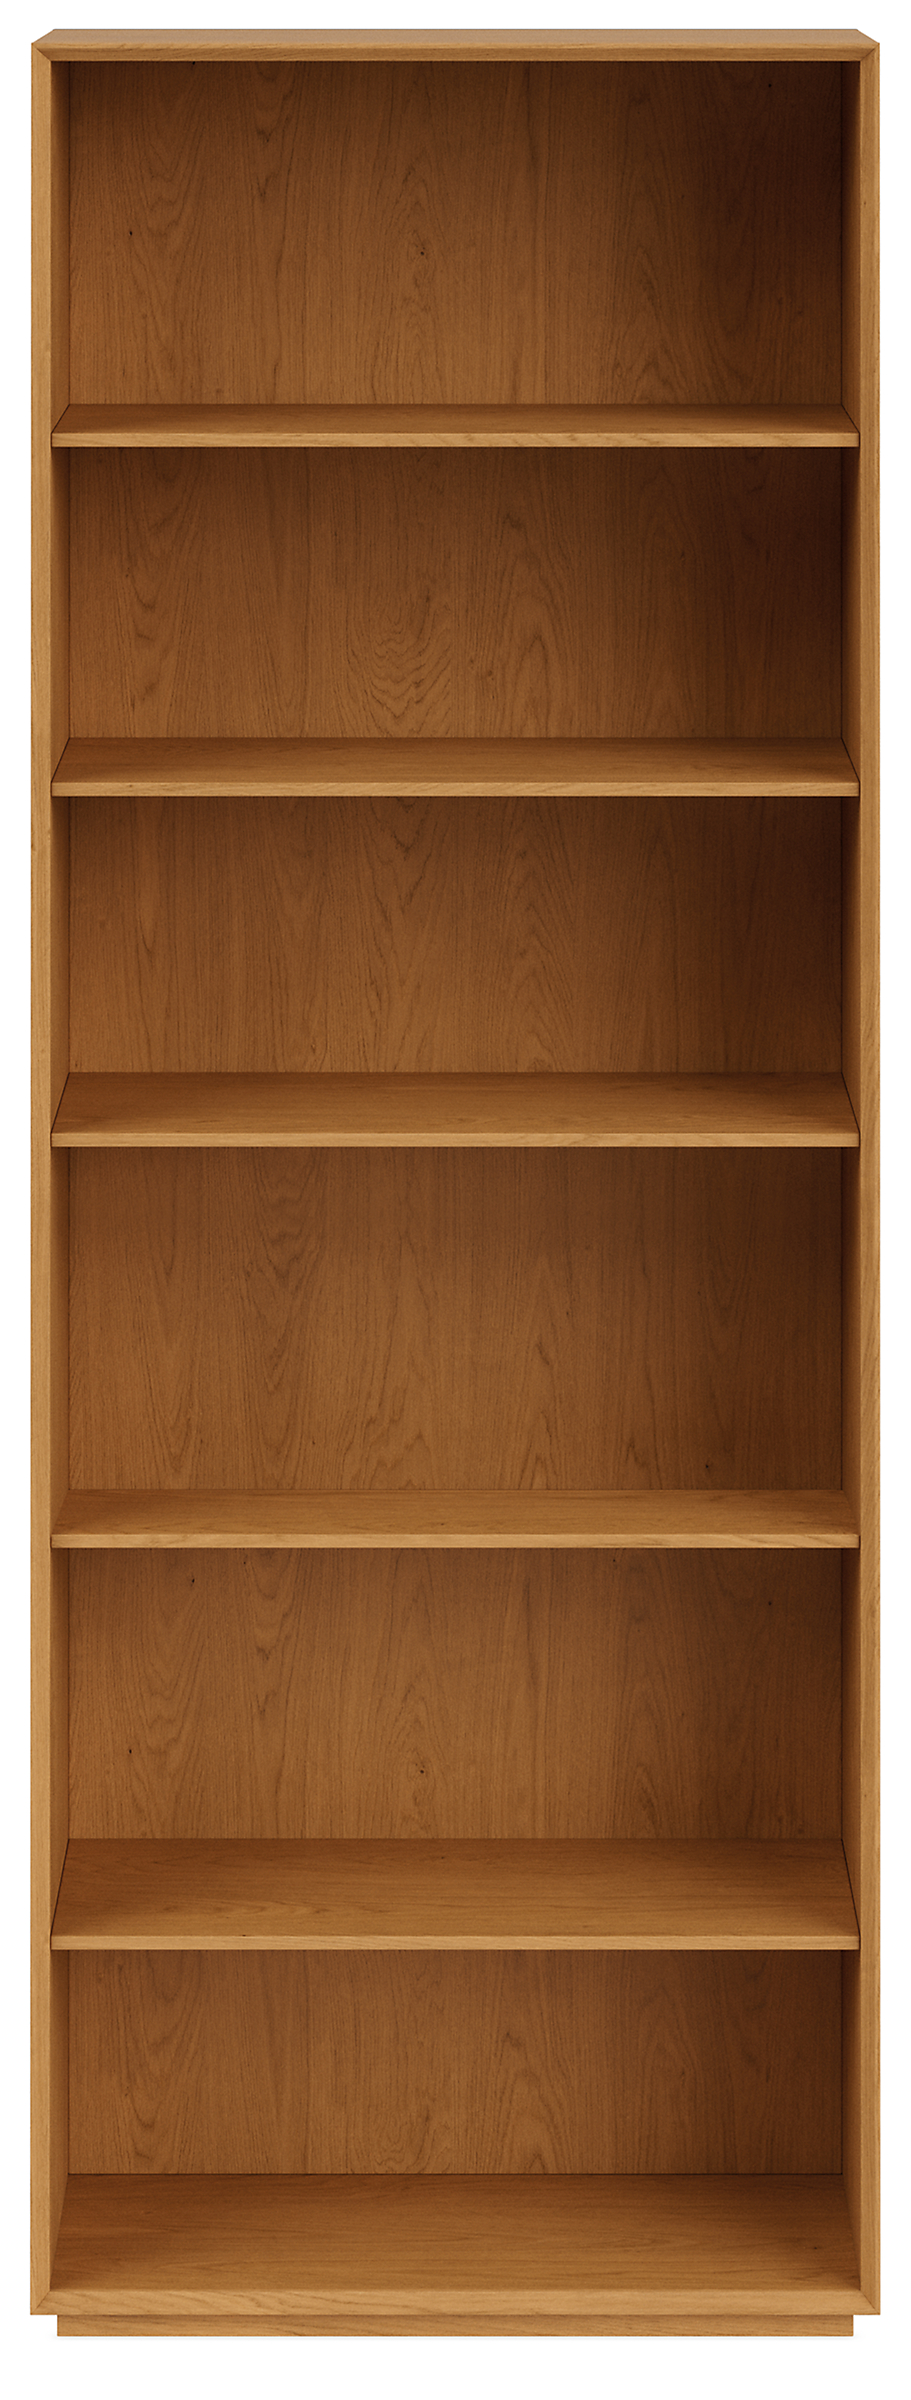 Rollins Bookcases